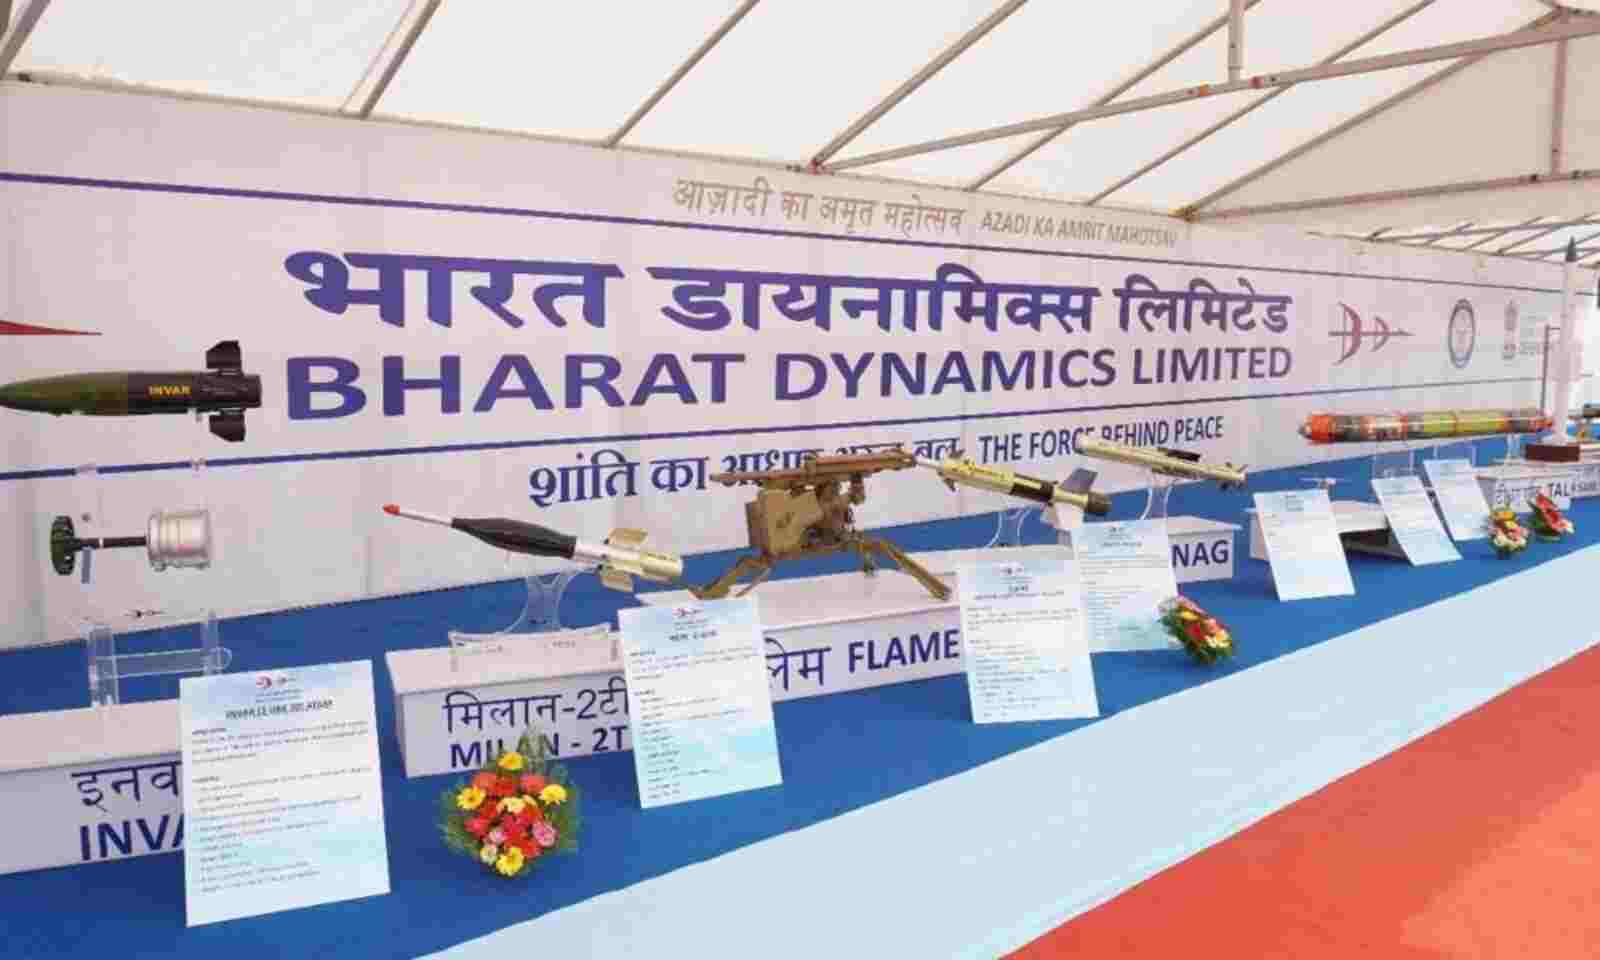 hyderabad: bharat dynamics limited product exhibition concludes